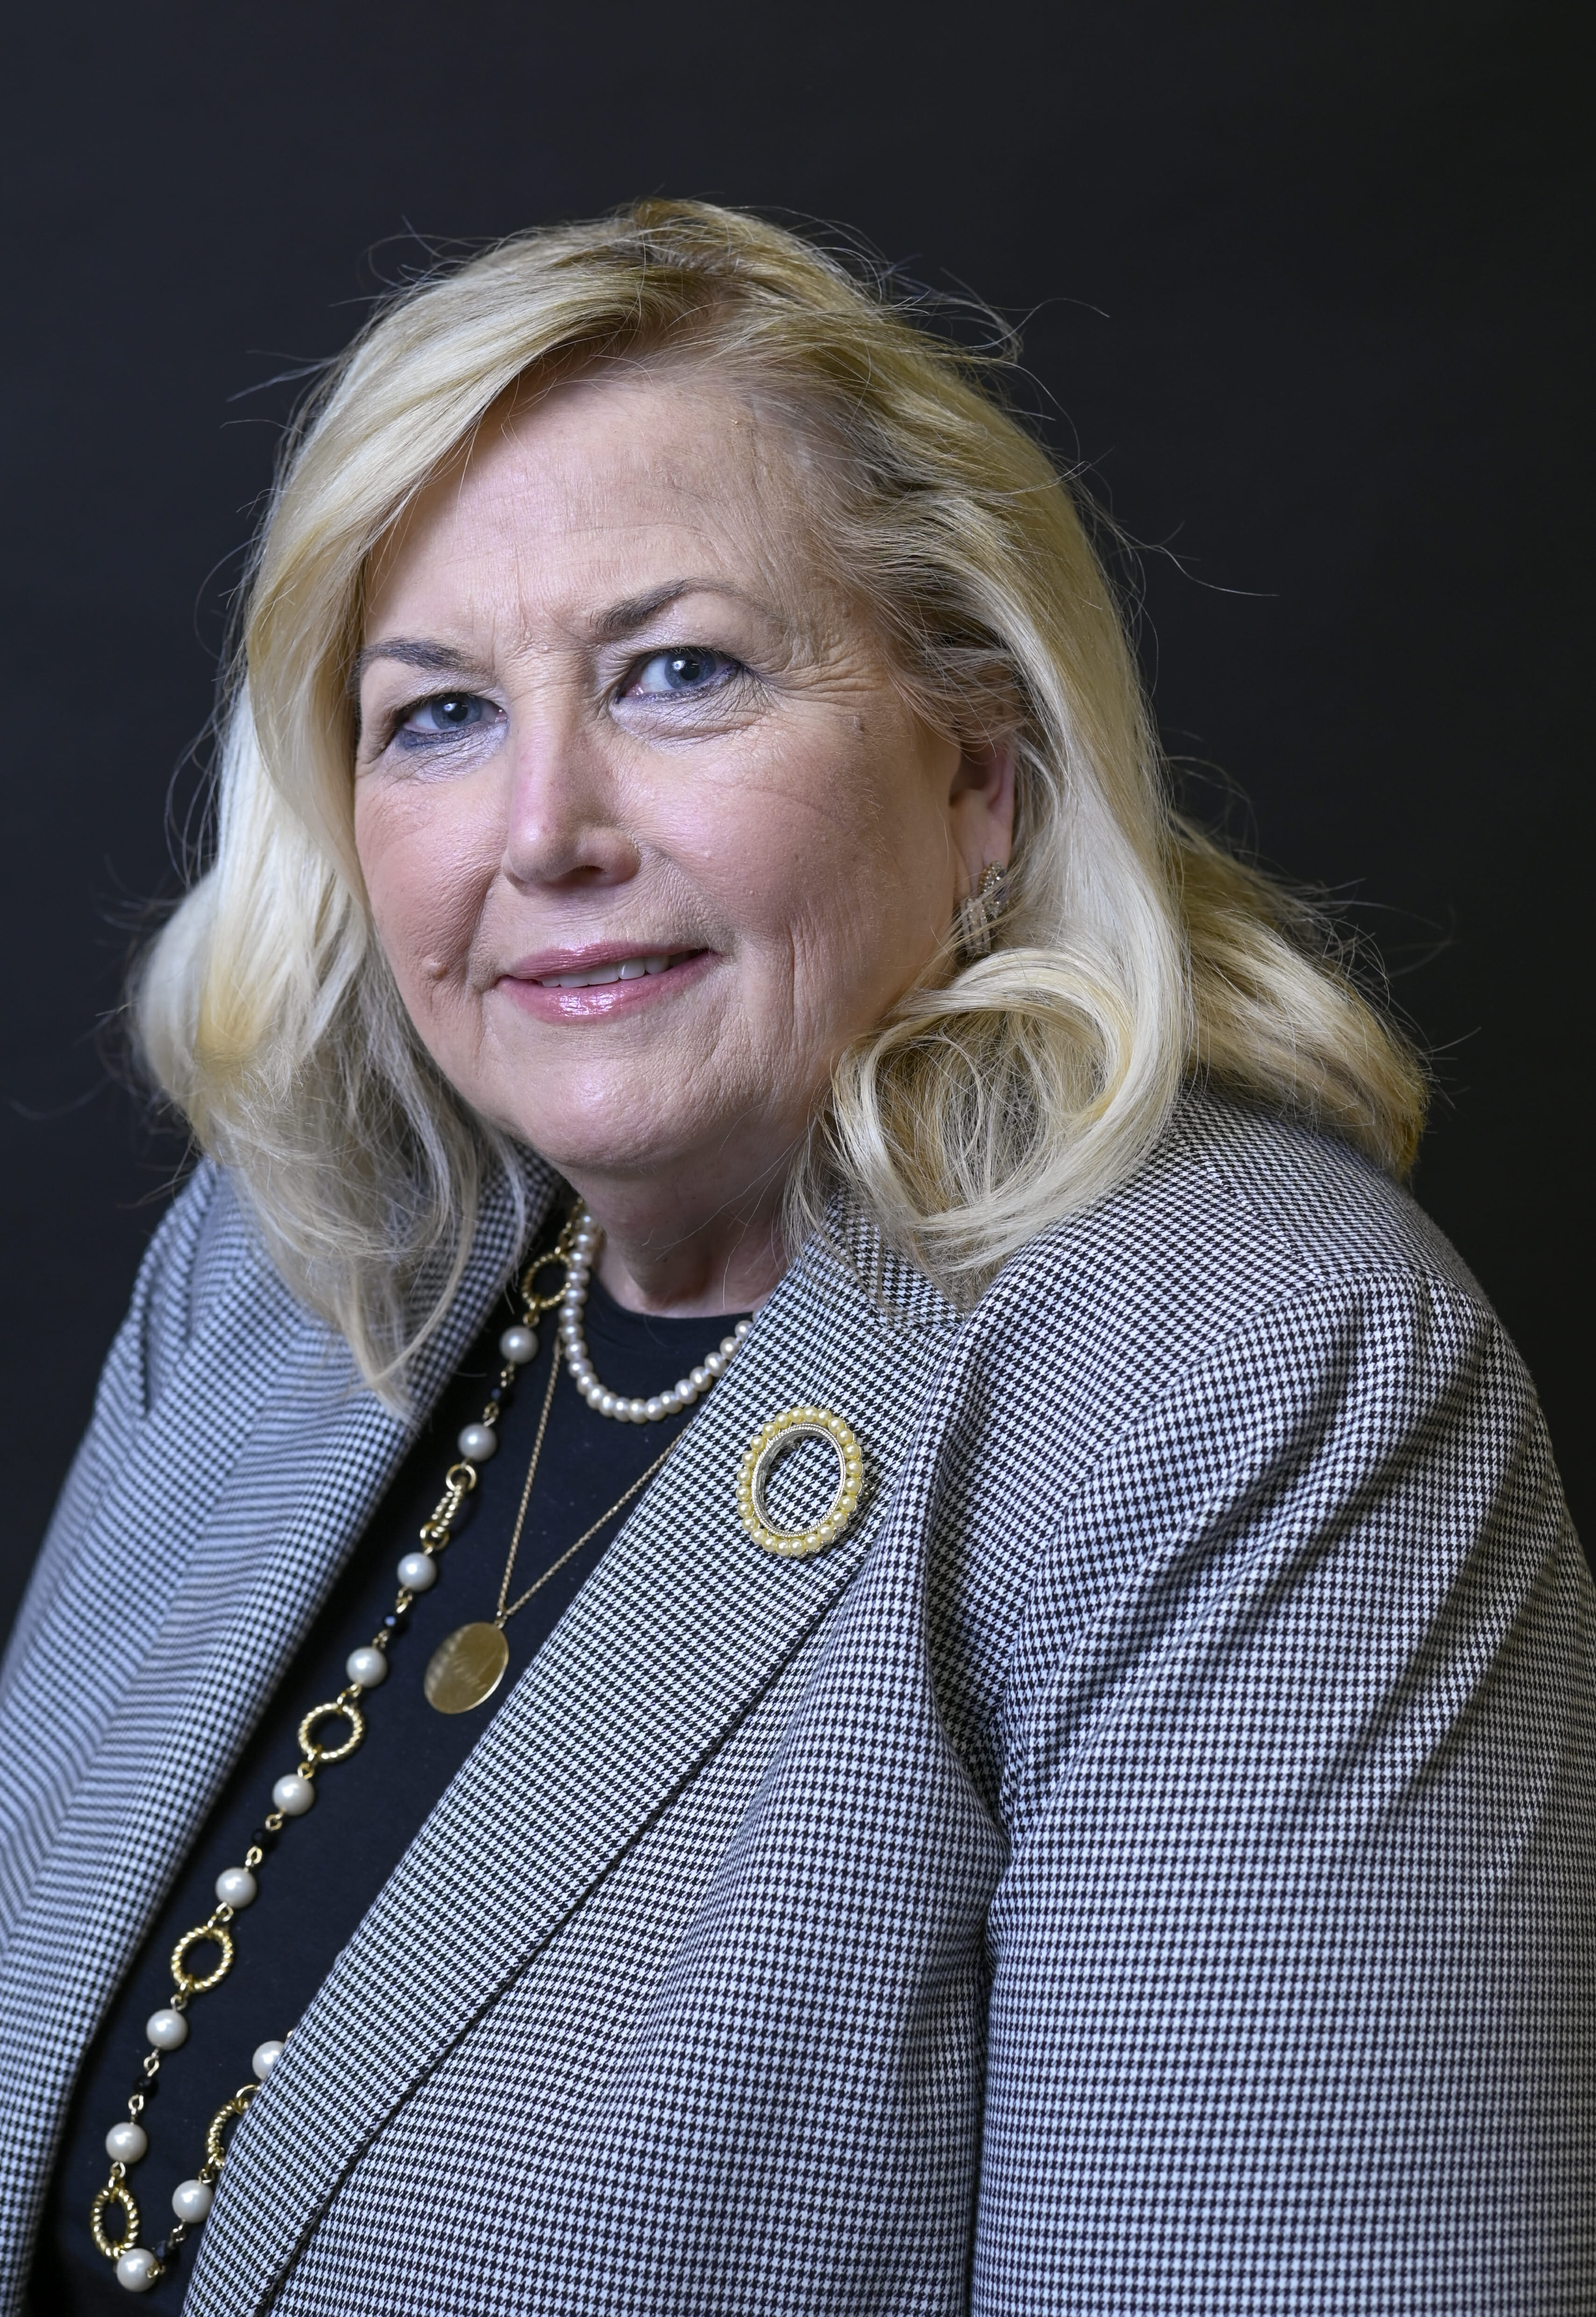 Suzanne Bershback | Board of Directors of Detroit Area Agency on Aging